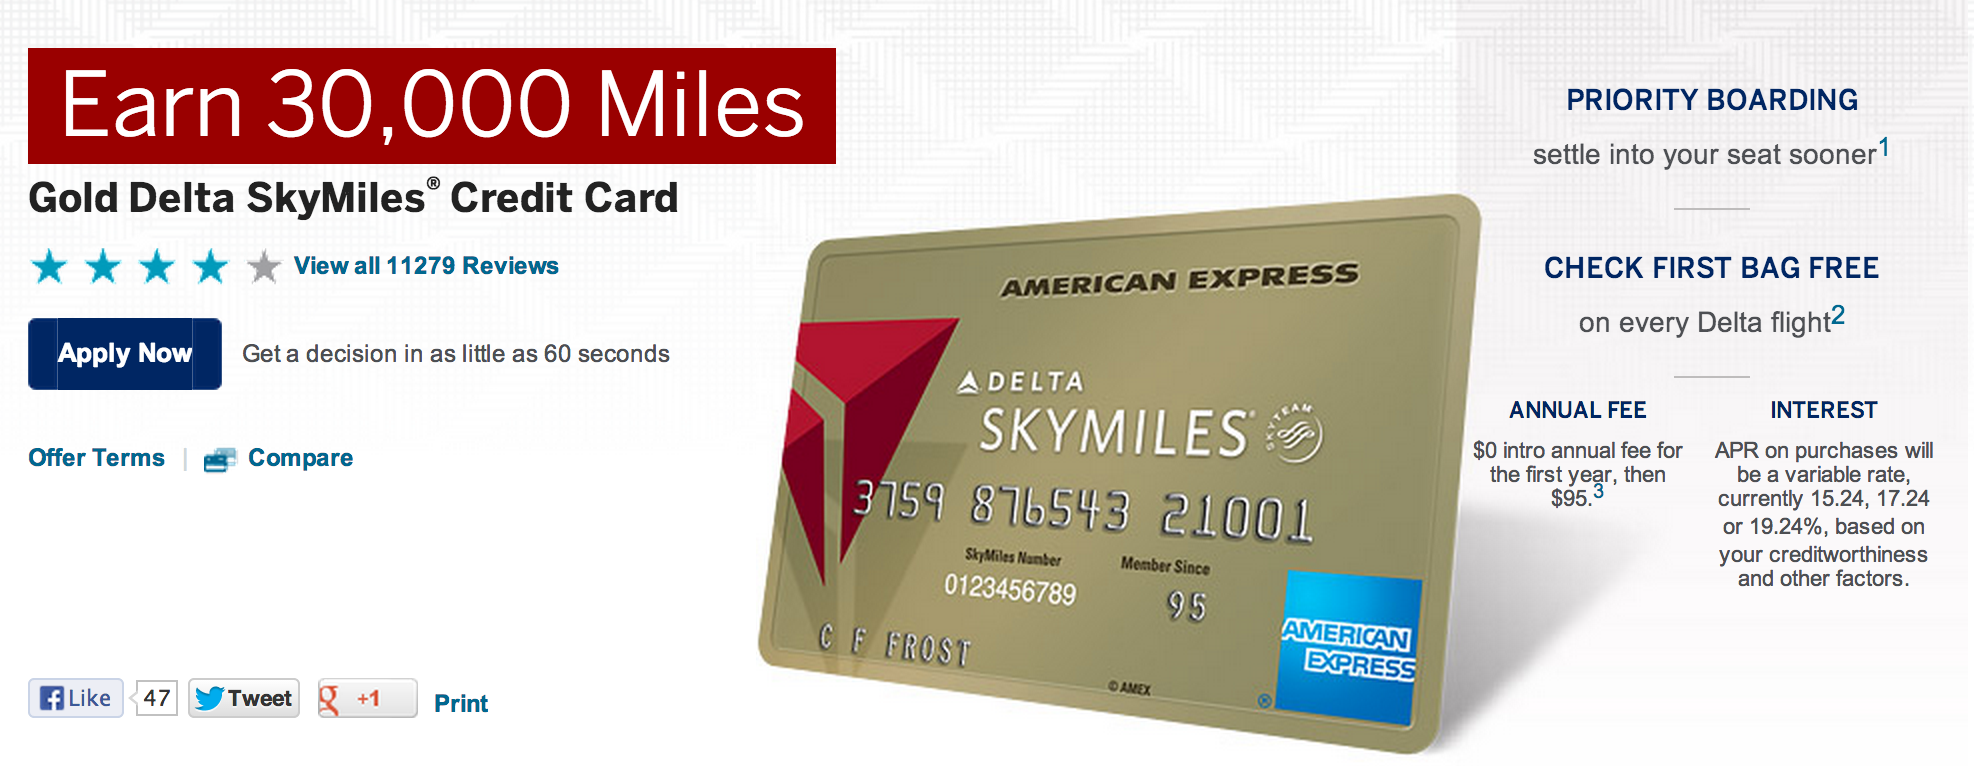 New American Express Delta Offers Out - Running with Miles